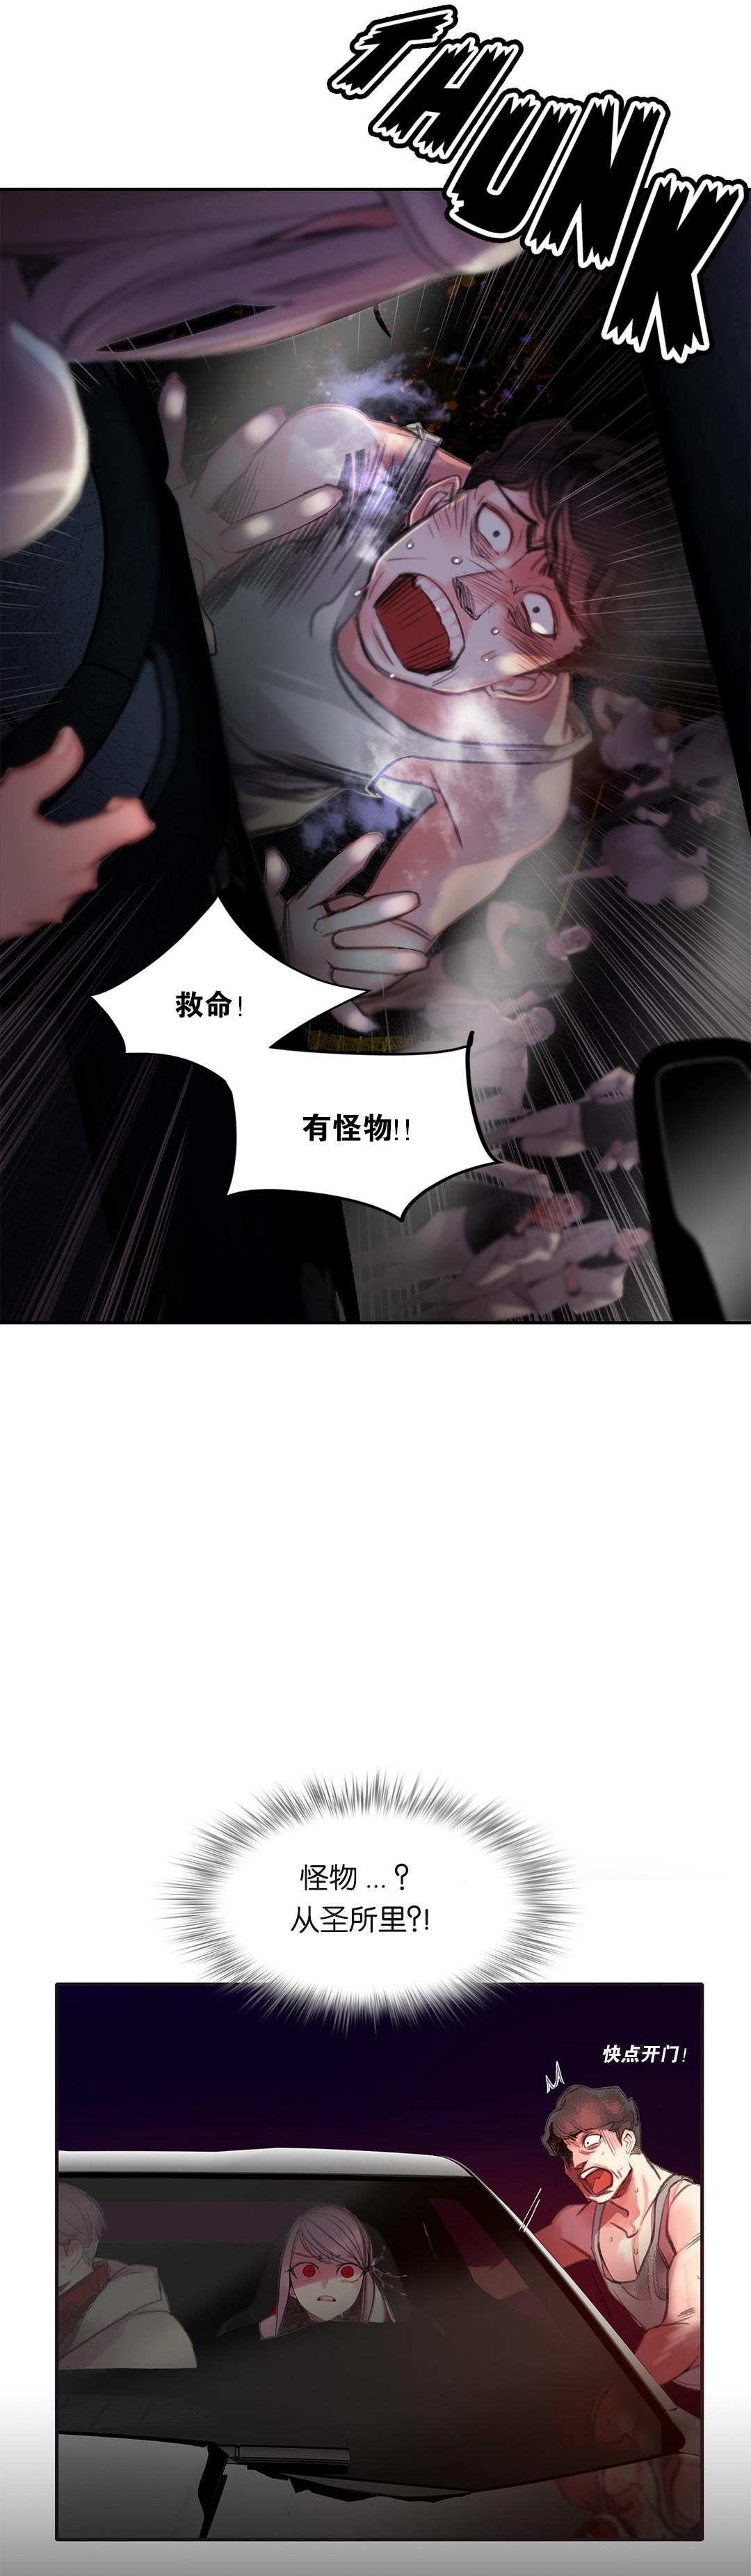 [Juder] Lilith`s Cord (第二季) Ch.61-64 [Chinese] [aaatwist个人汉化] [Ongoing] 14